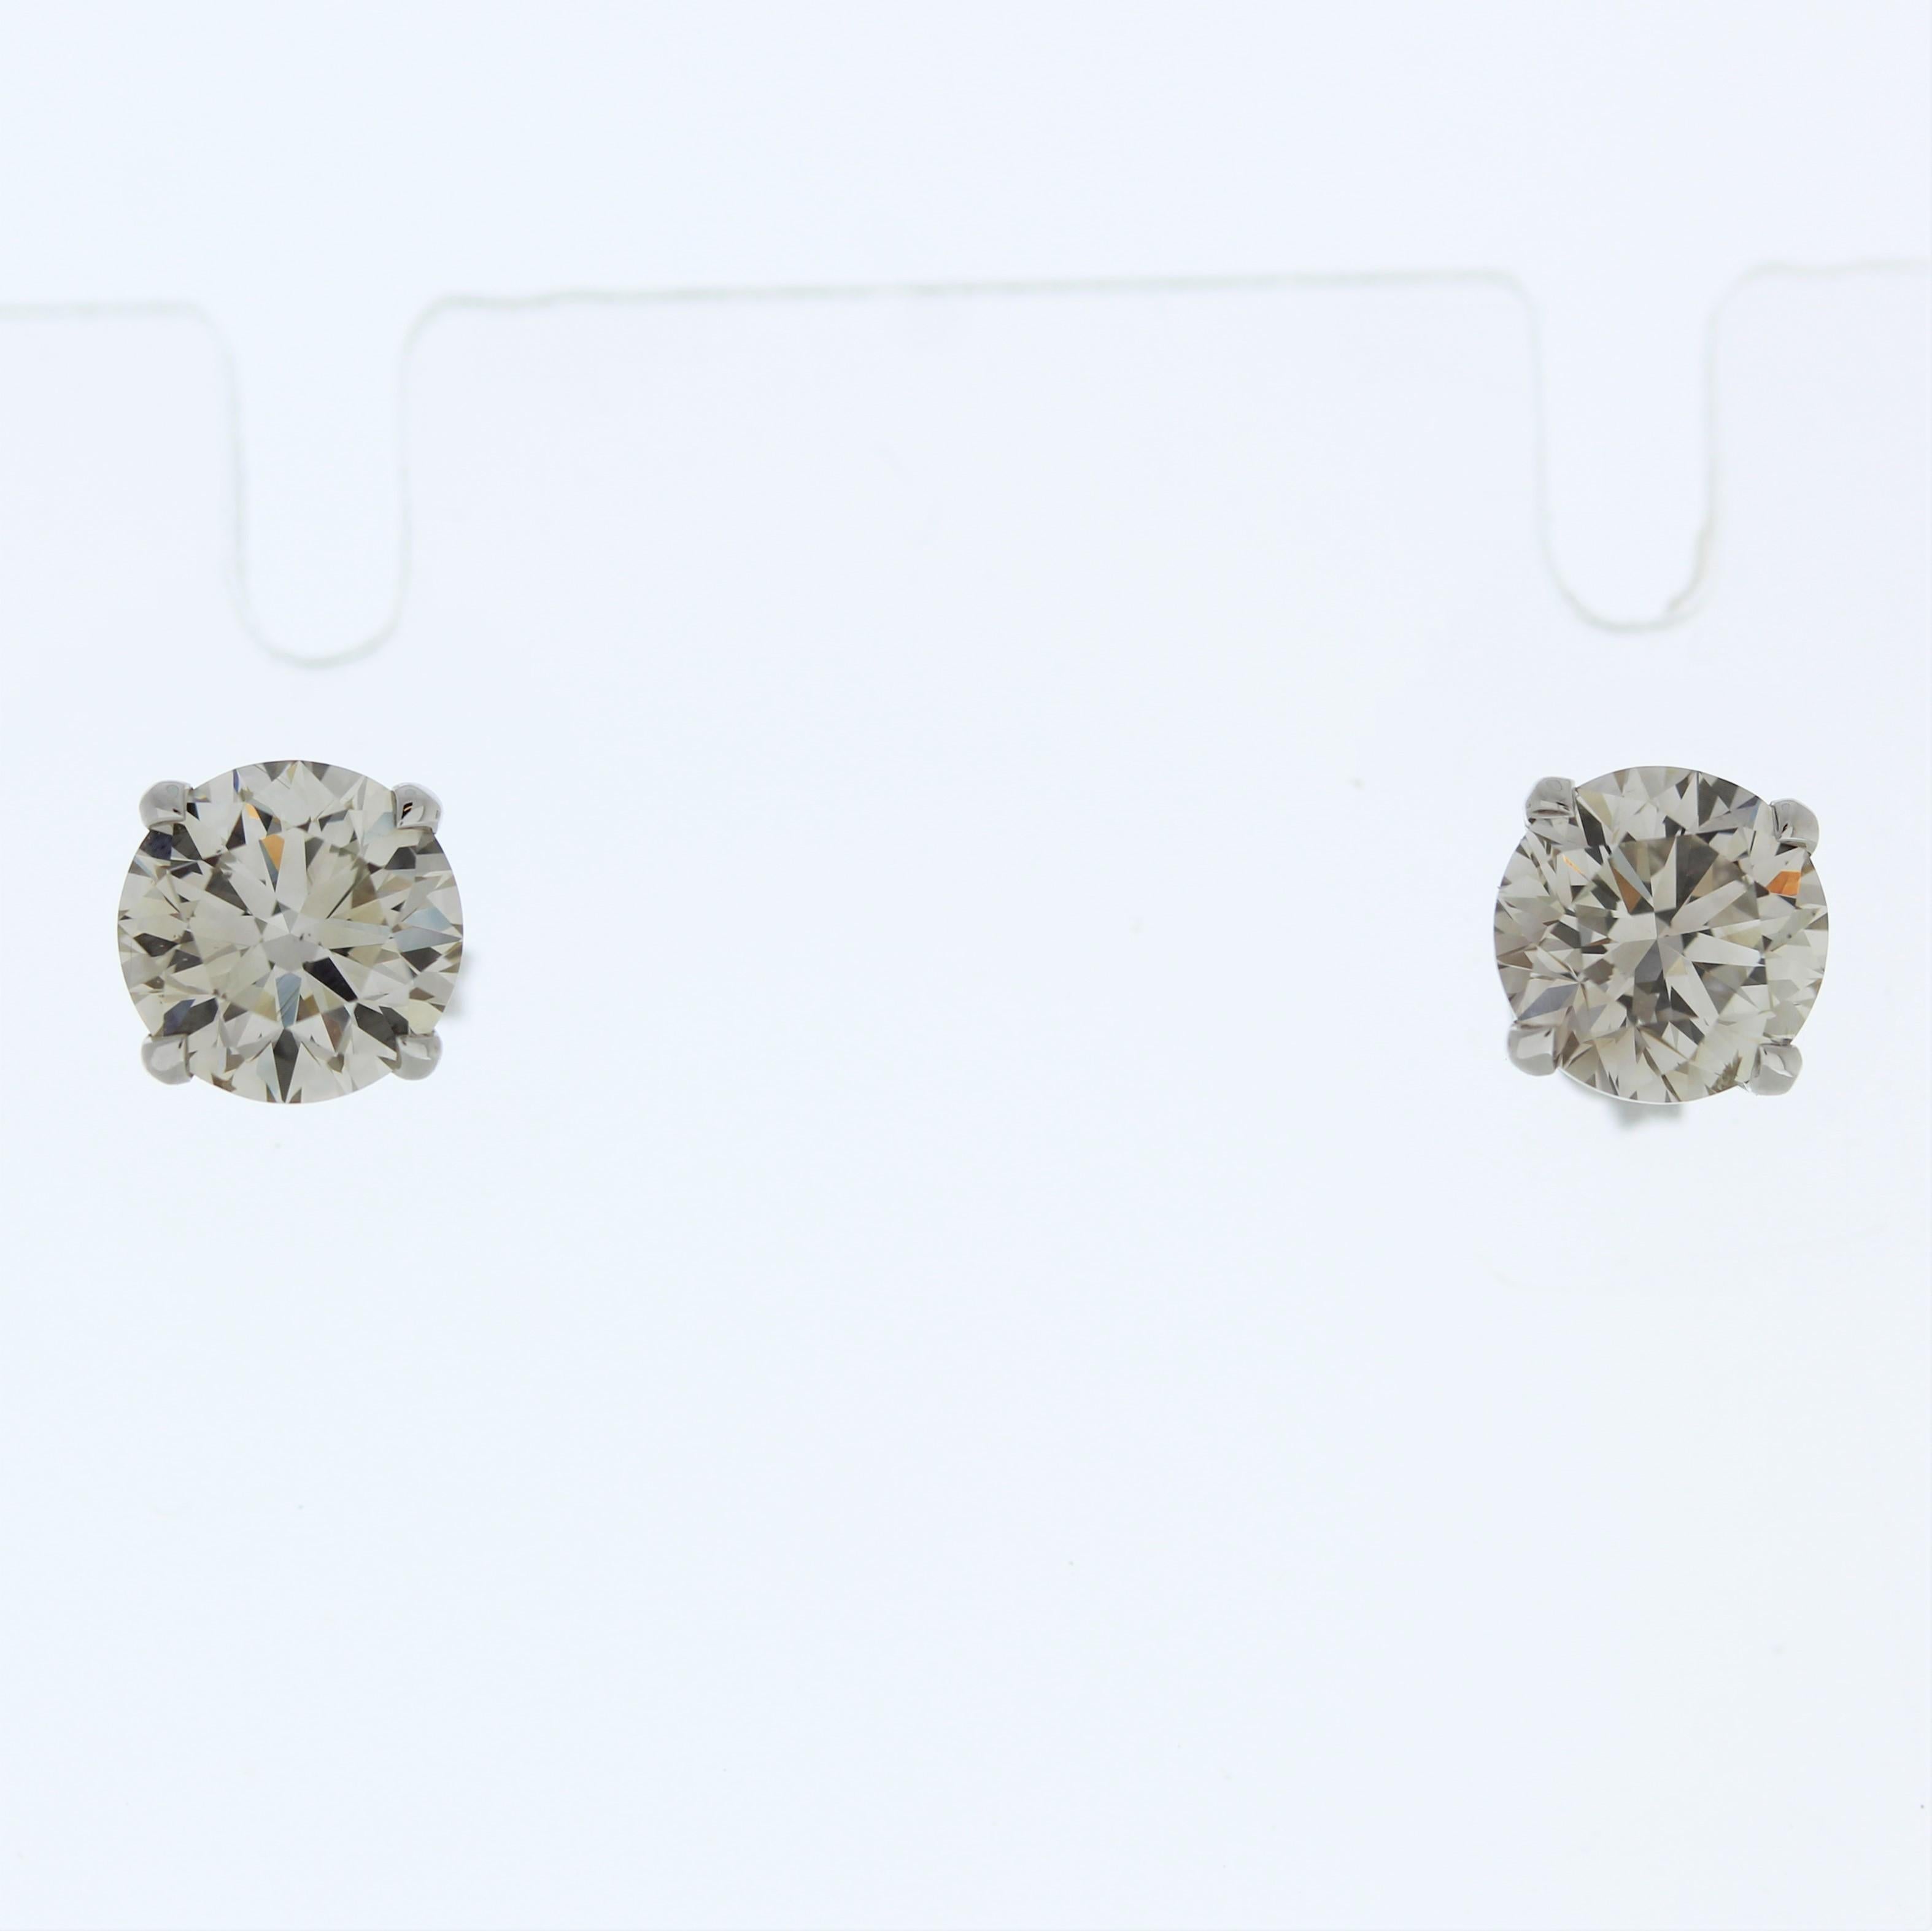 Round Cut 3.01 Total Carat Weight EGL Certified Round Diamond Studs In 14k White Gold For Sale